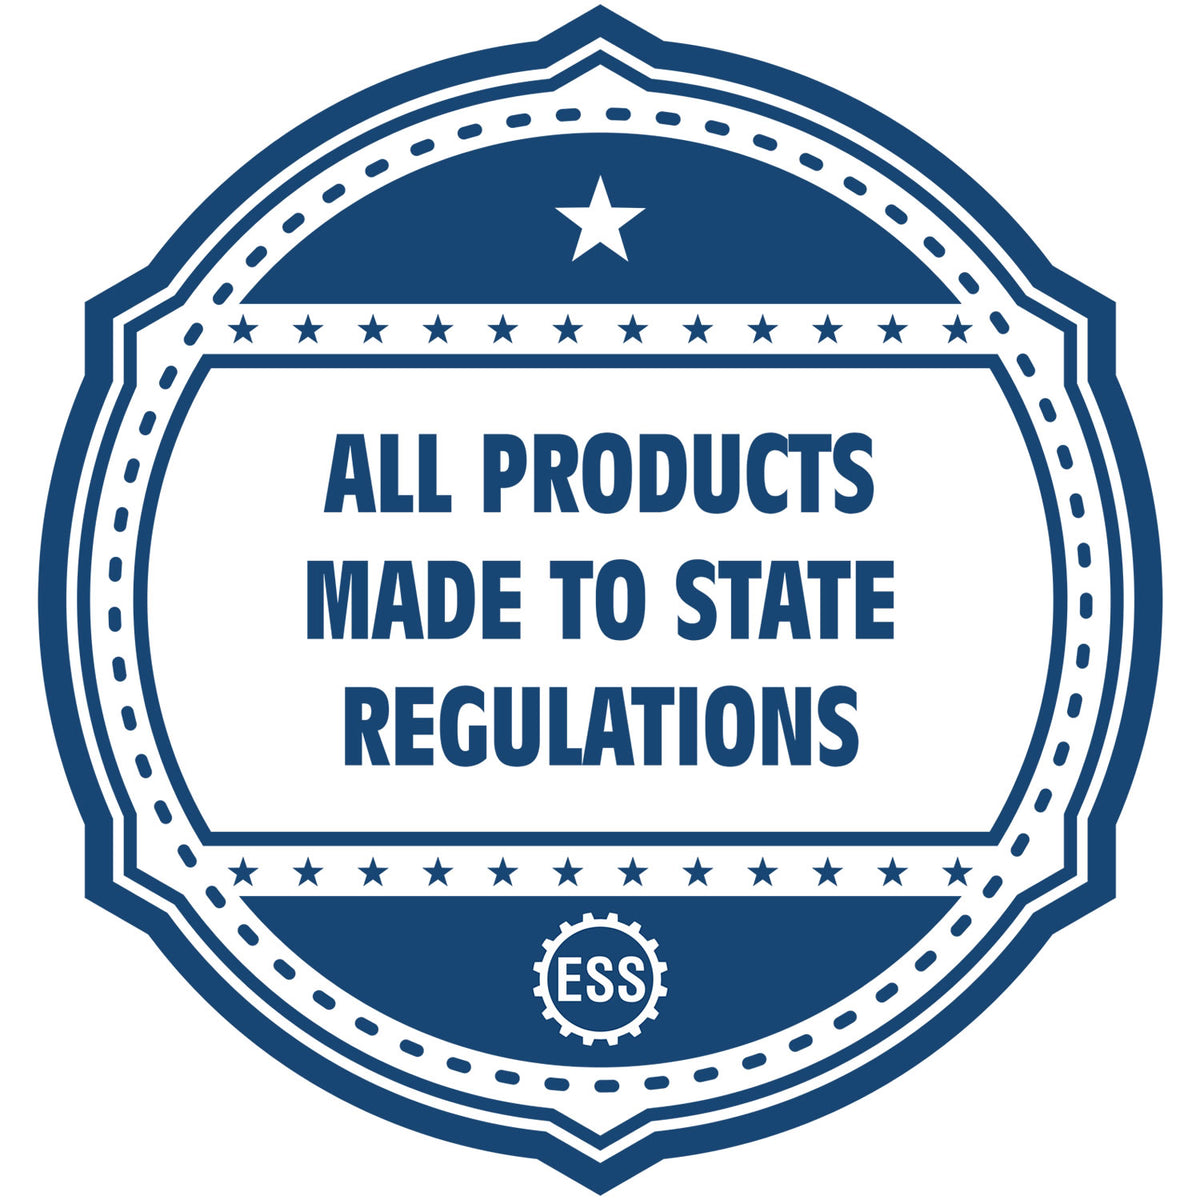 An icon or badge element for the Washington Engineer Desk Seal showing that this product is made in compliance with state regulations.